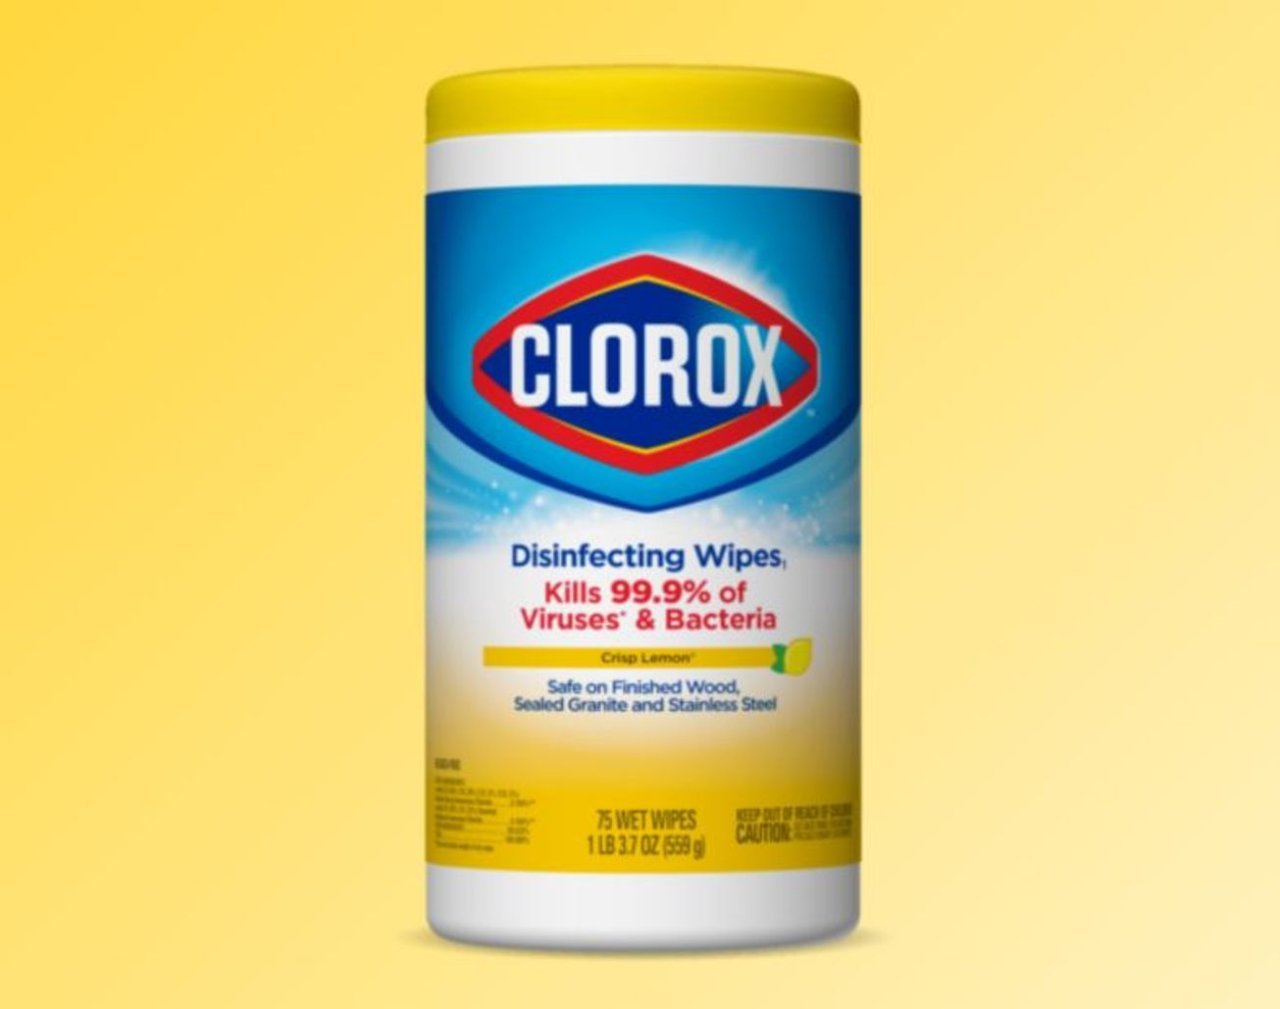 Clorox Disinfecting Wipes Shortage Expected to Continue Into Next Year